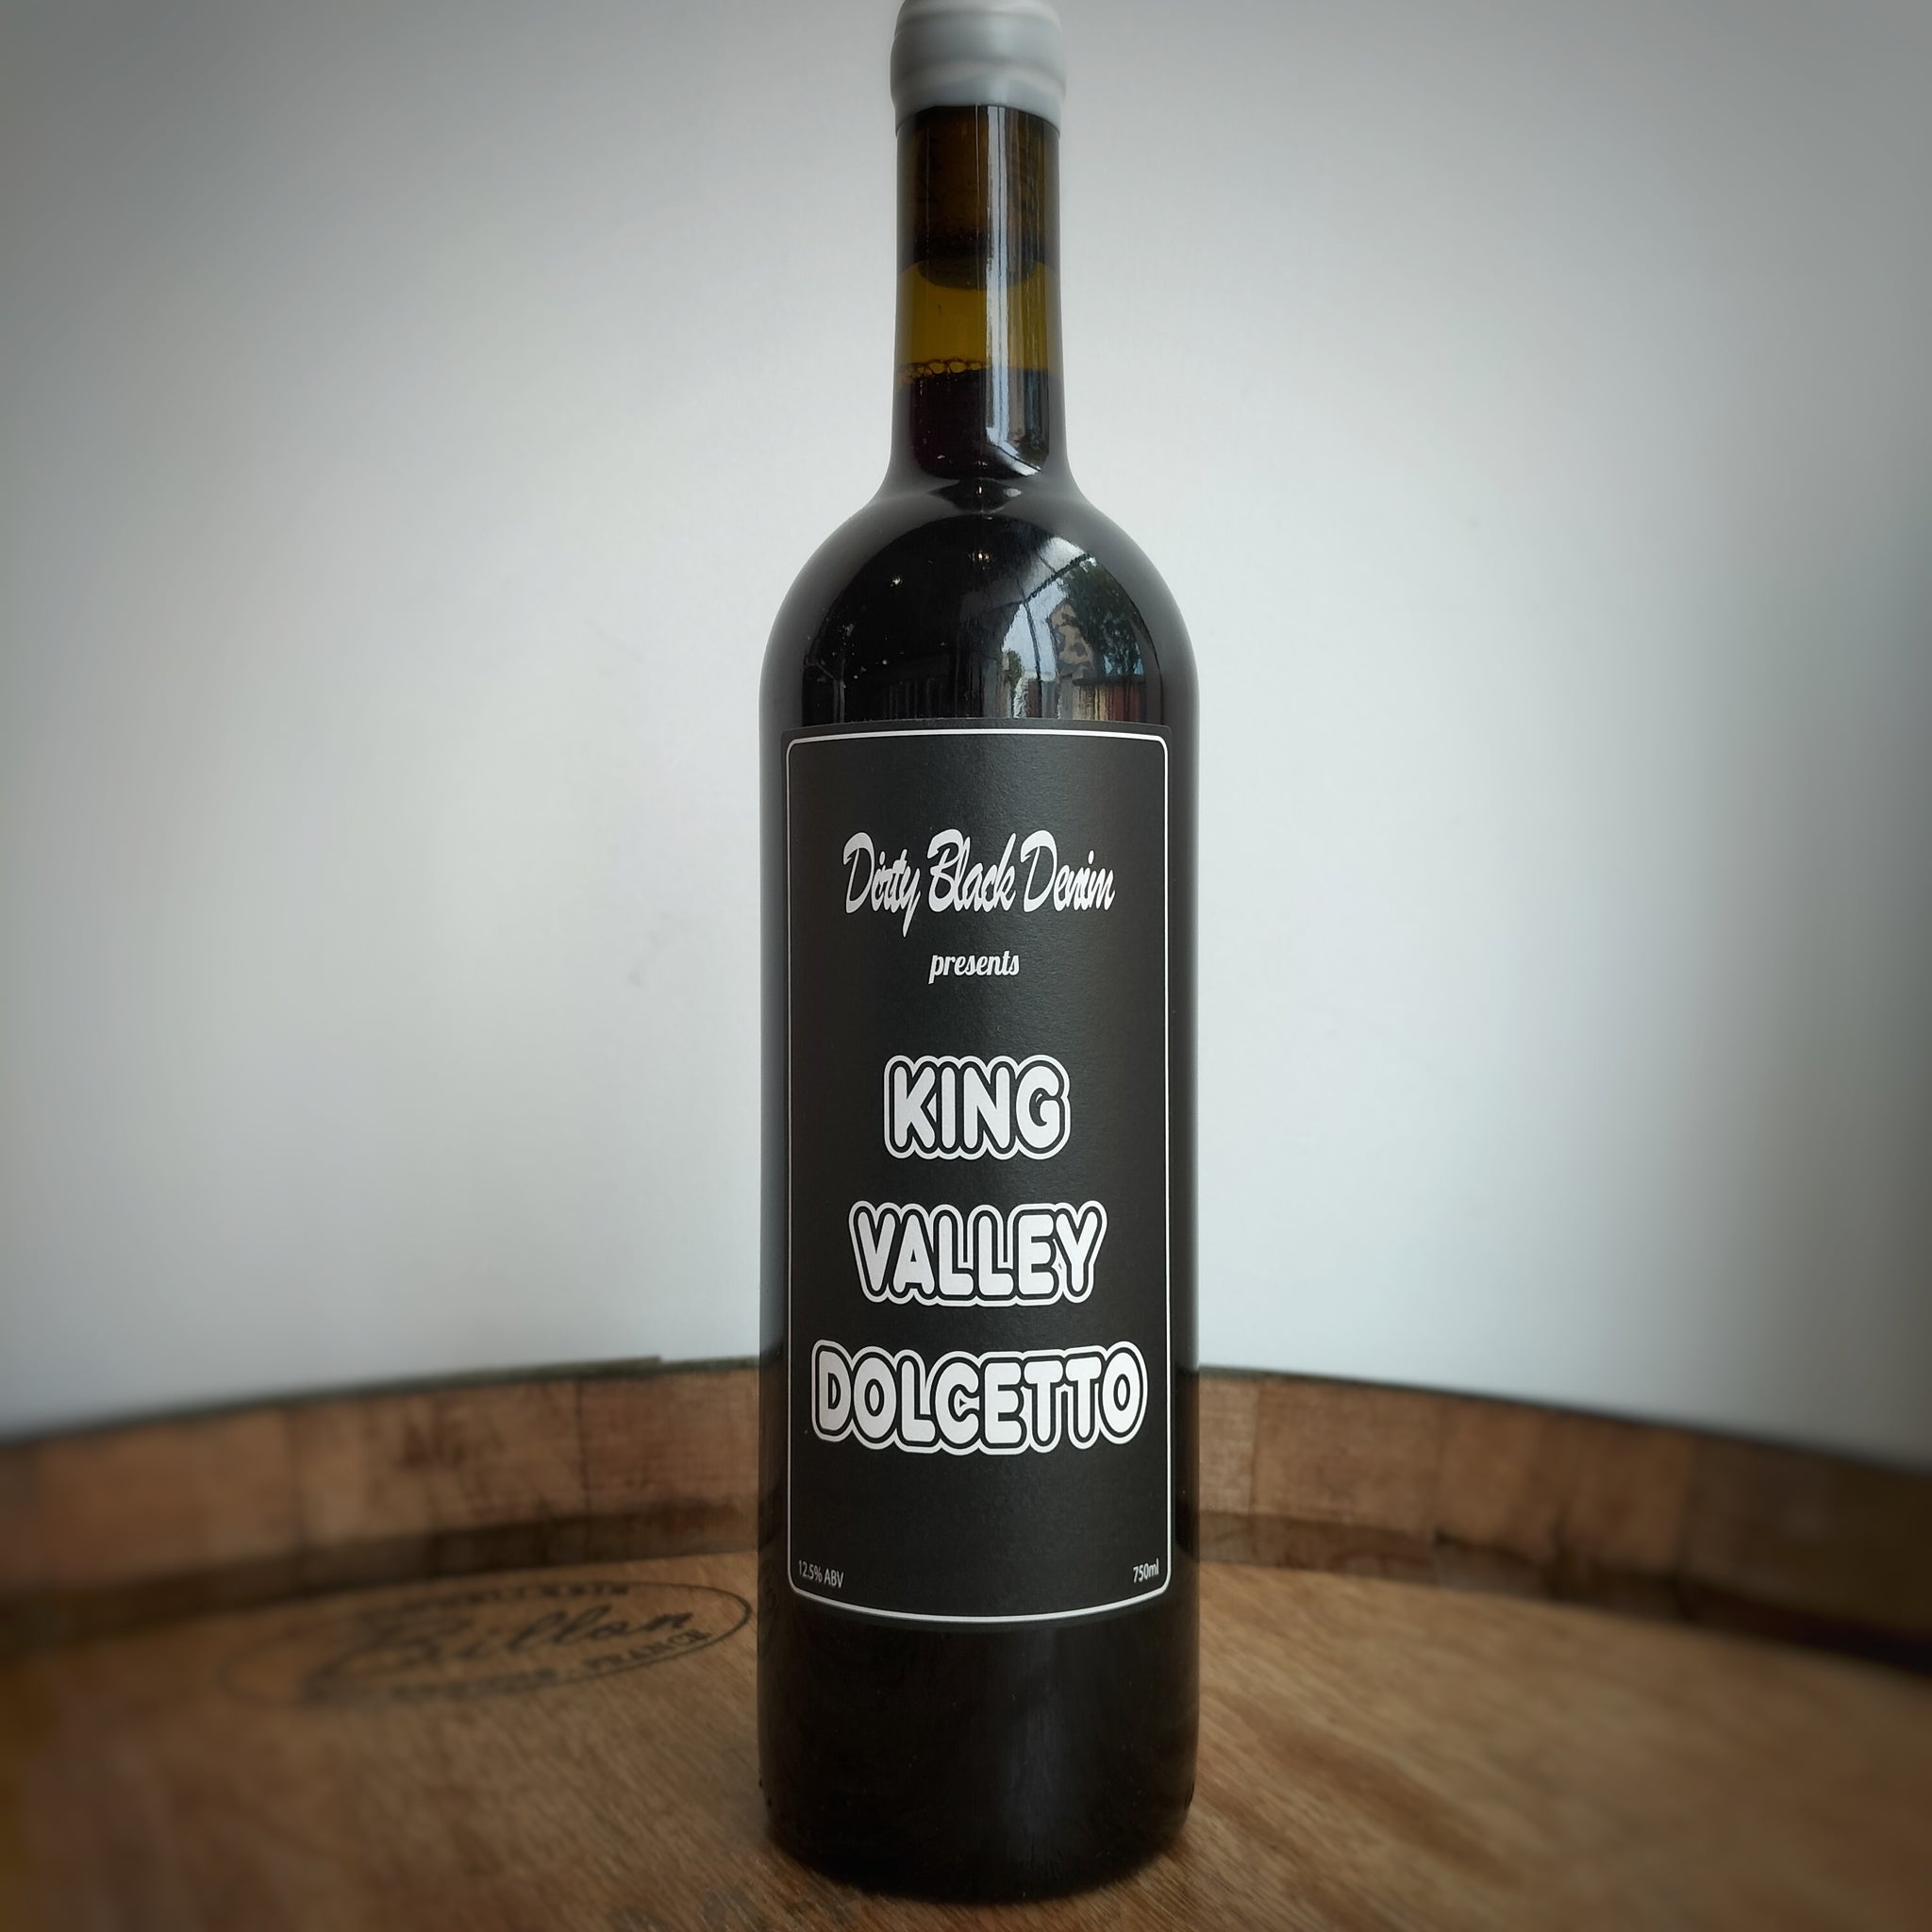 2021 Dirty Black Denim King Valley Dolcetto